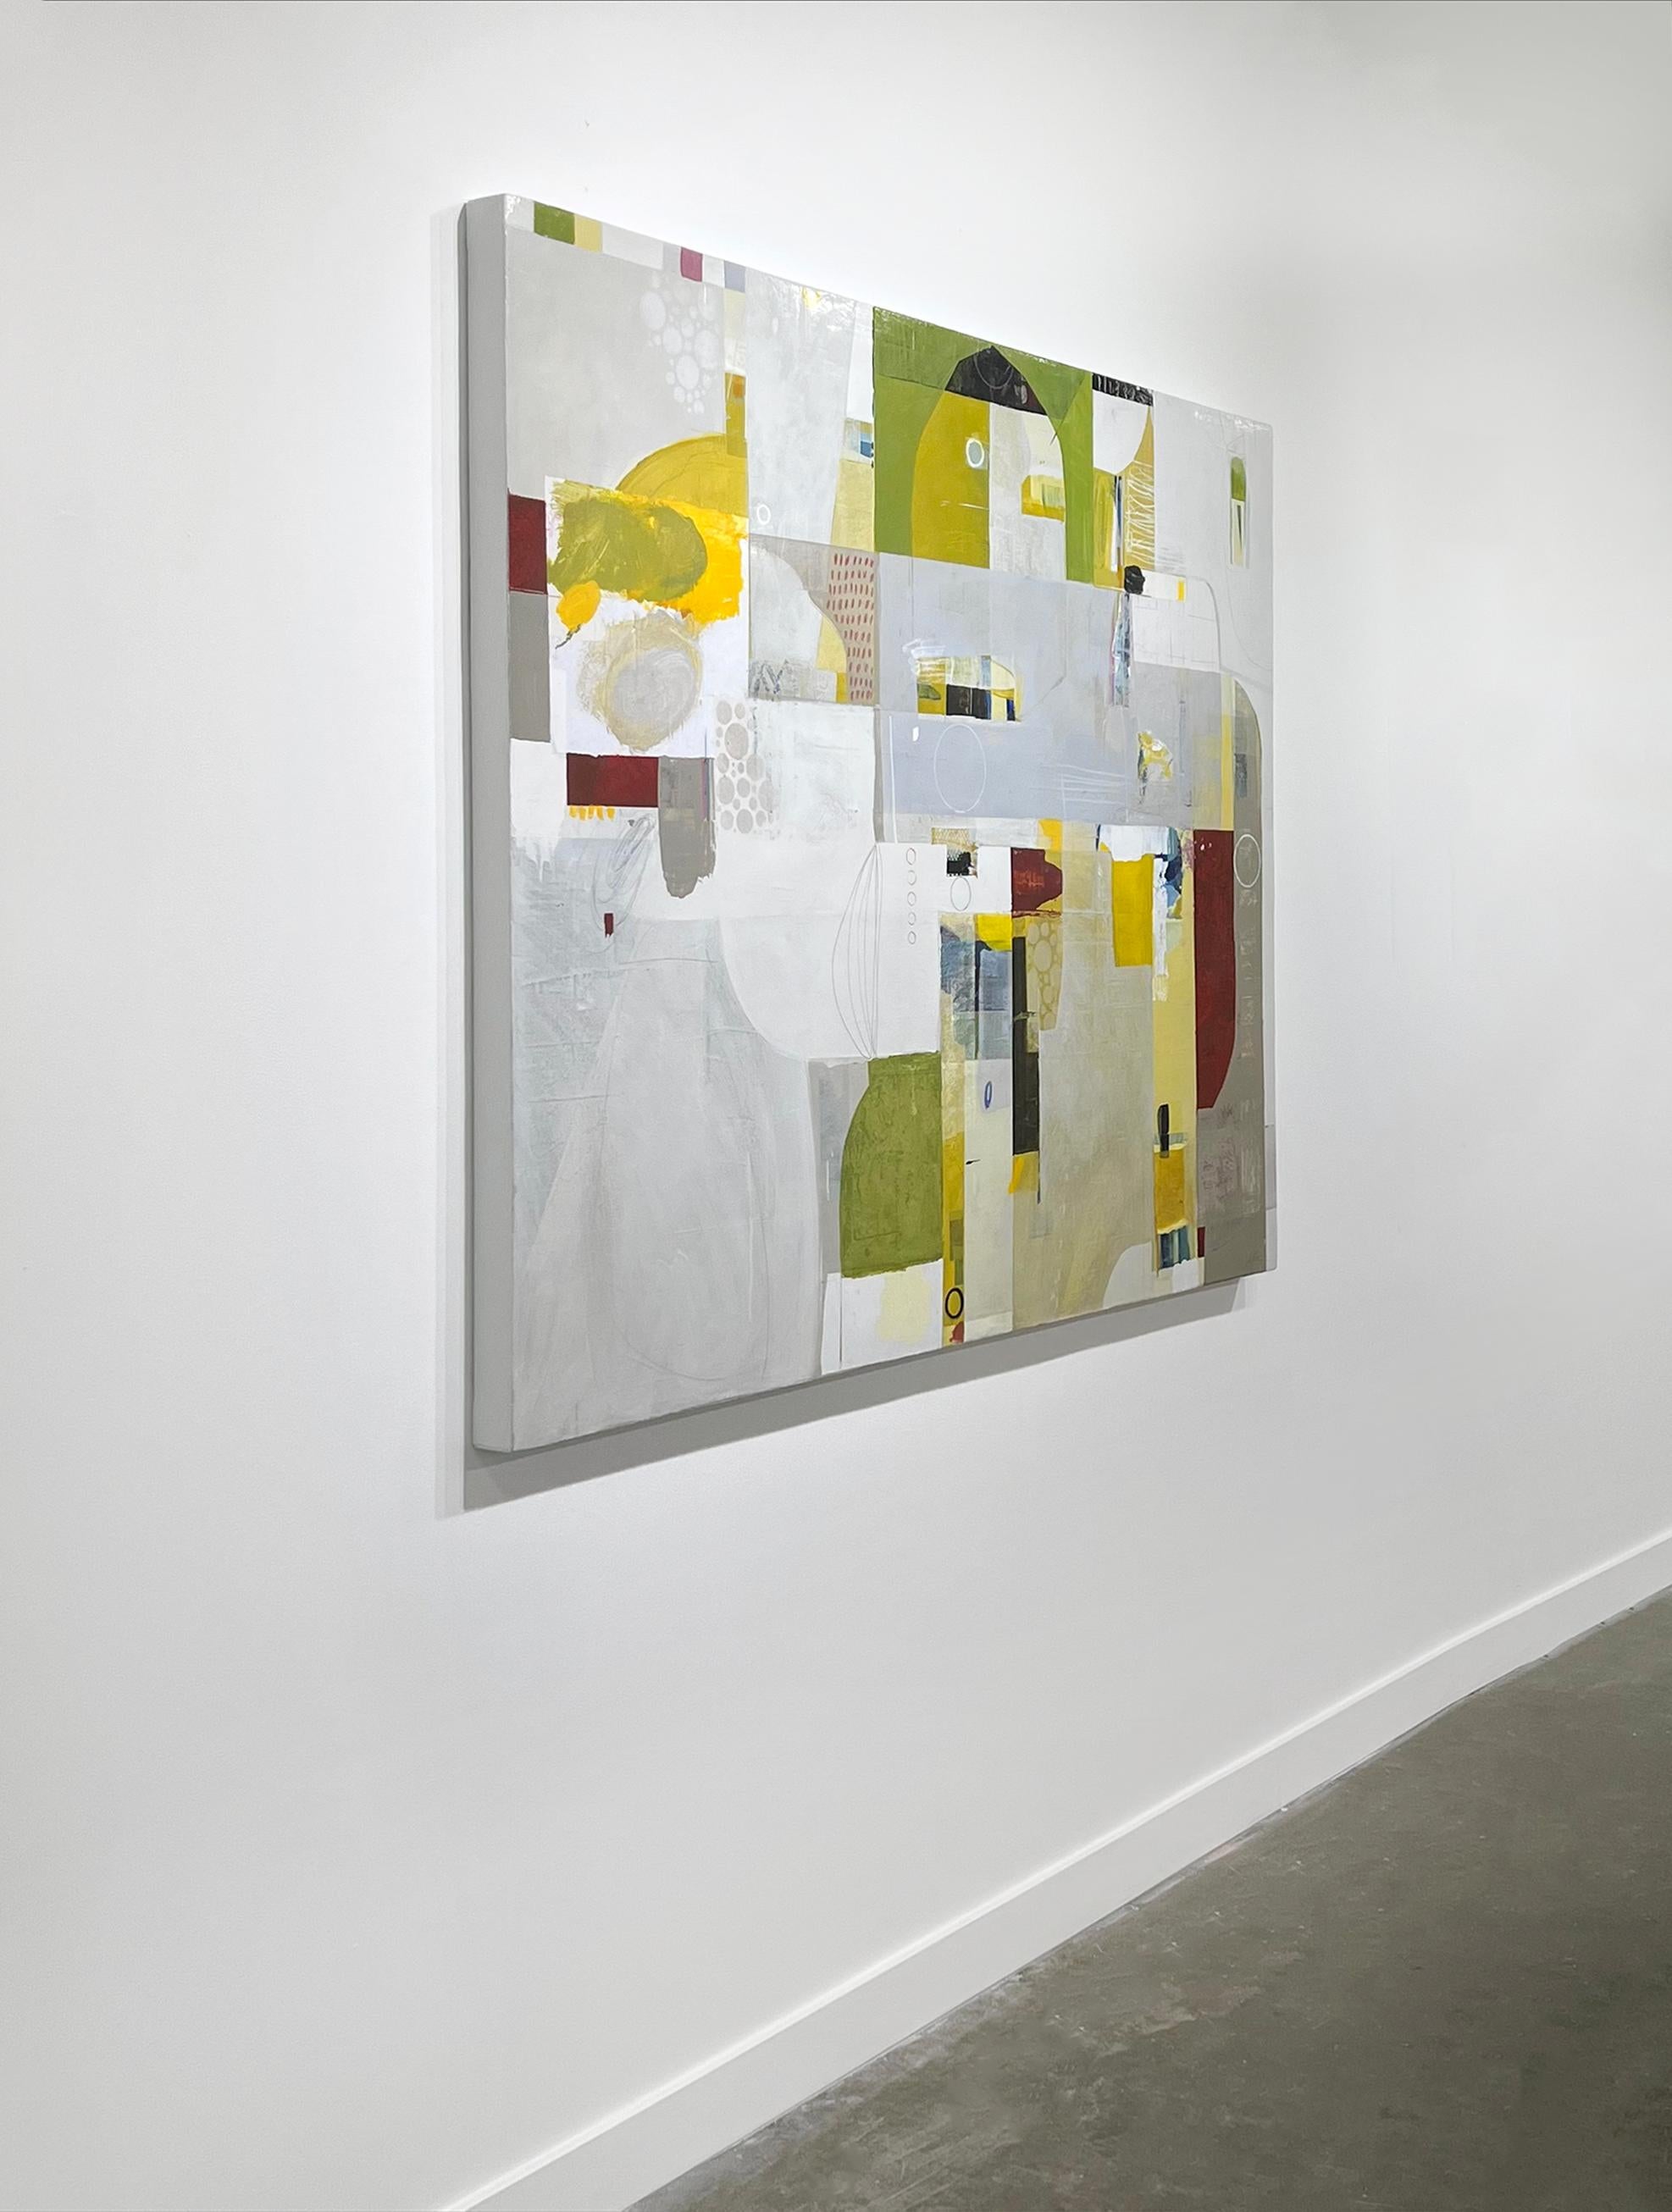 This abstract collage painting by Deborah Colter is made with mixed media on gallery wrapped canvas on panel. It features a multicolored palette, with neutral greys accented by unique green, red, and yellow tones. The found paper elements are